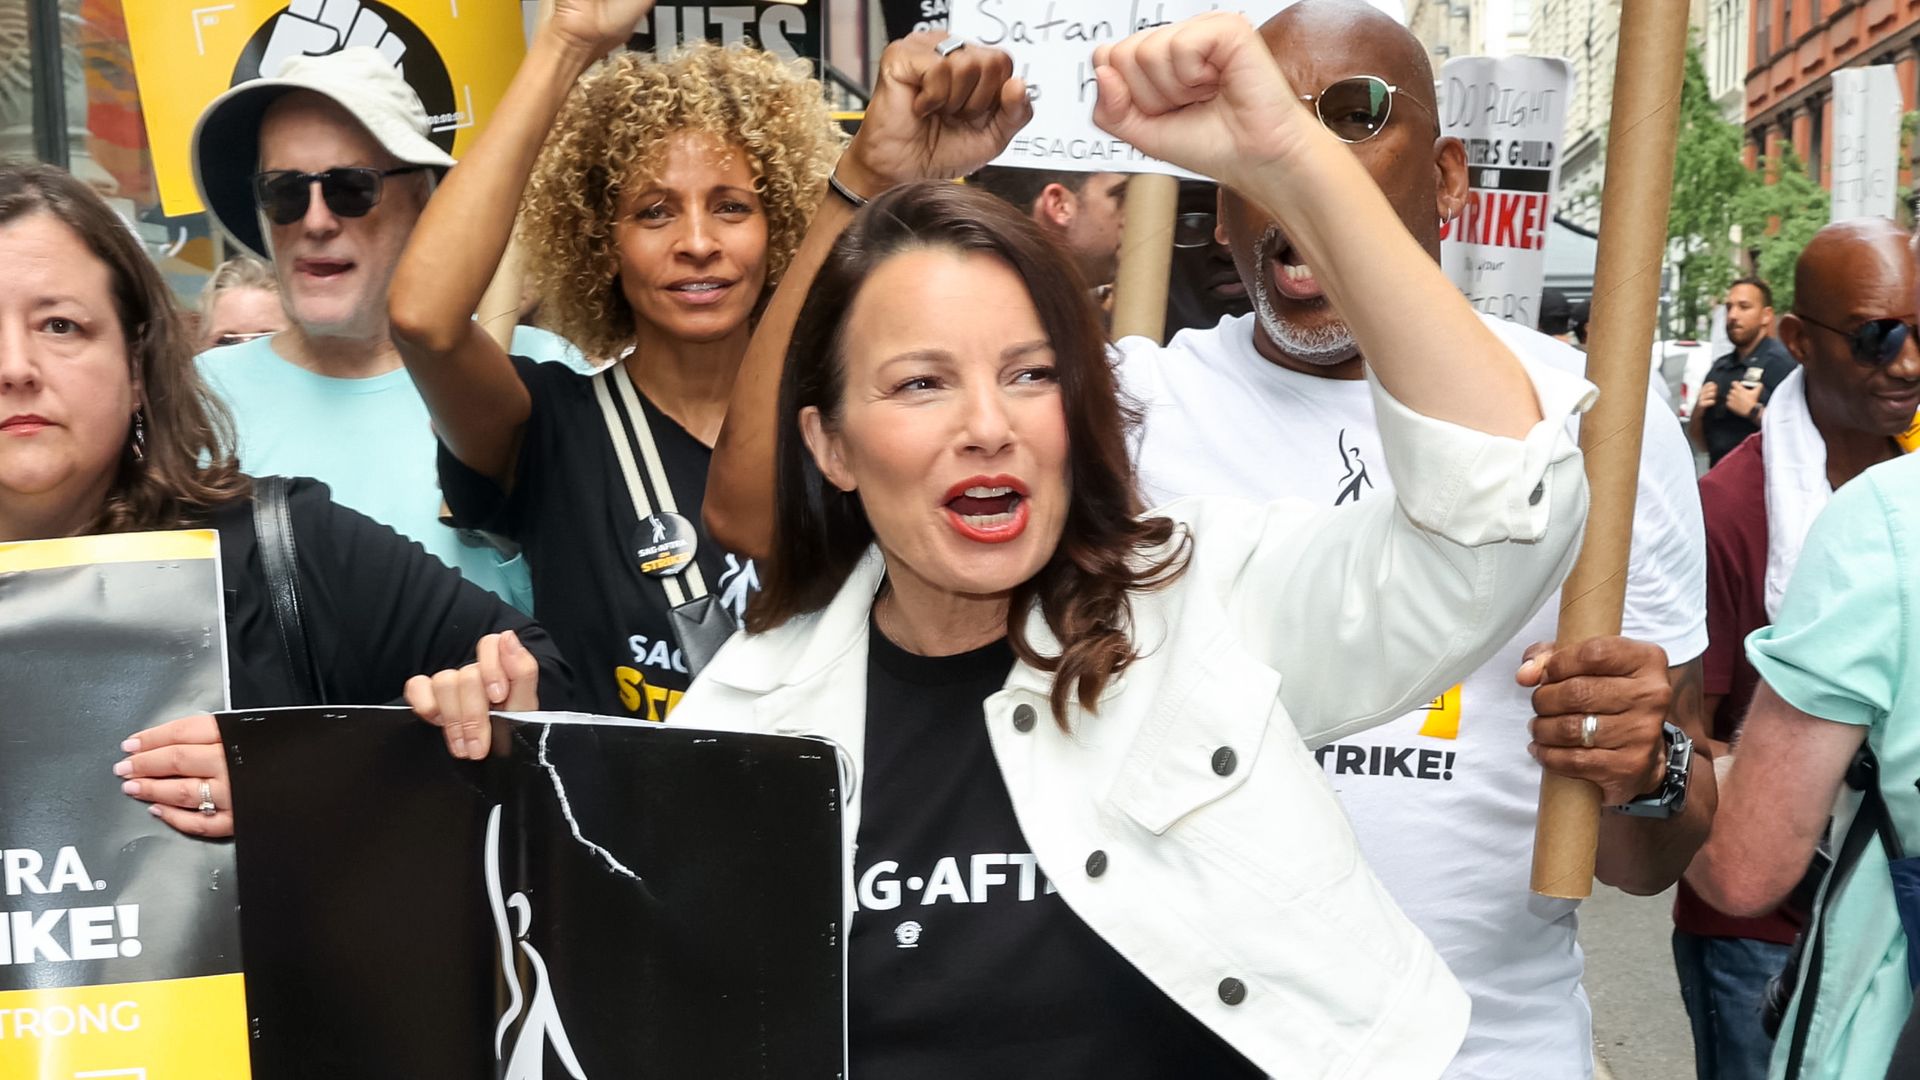 Photo of Fran Drescher and other actors carrying picket signs